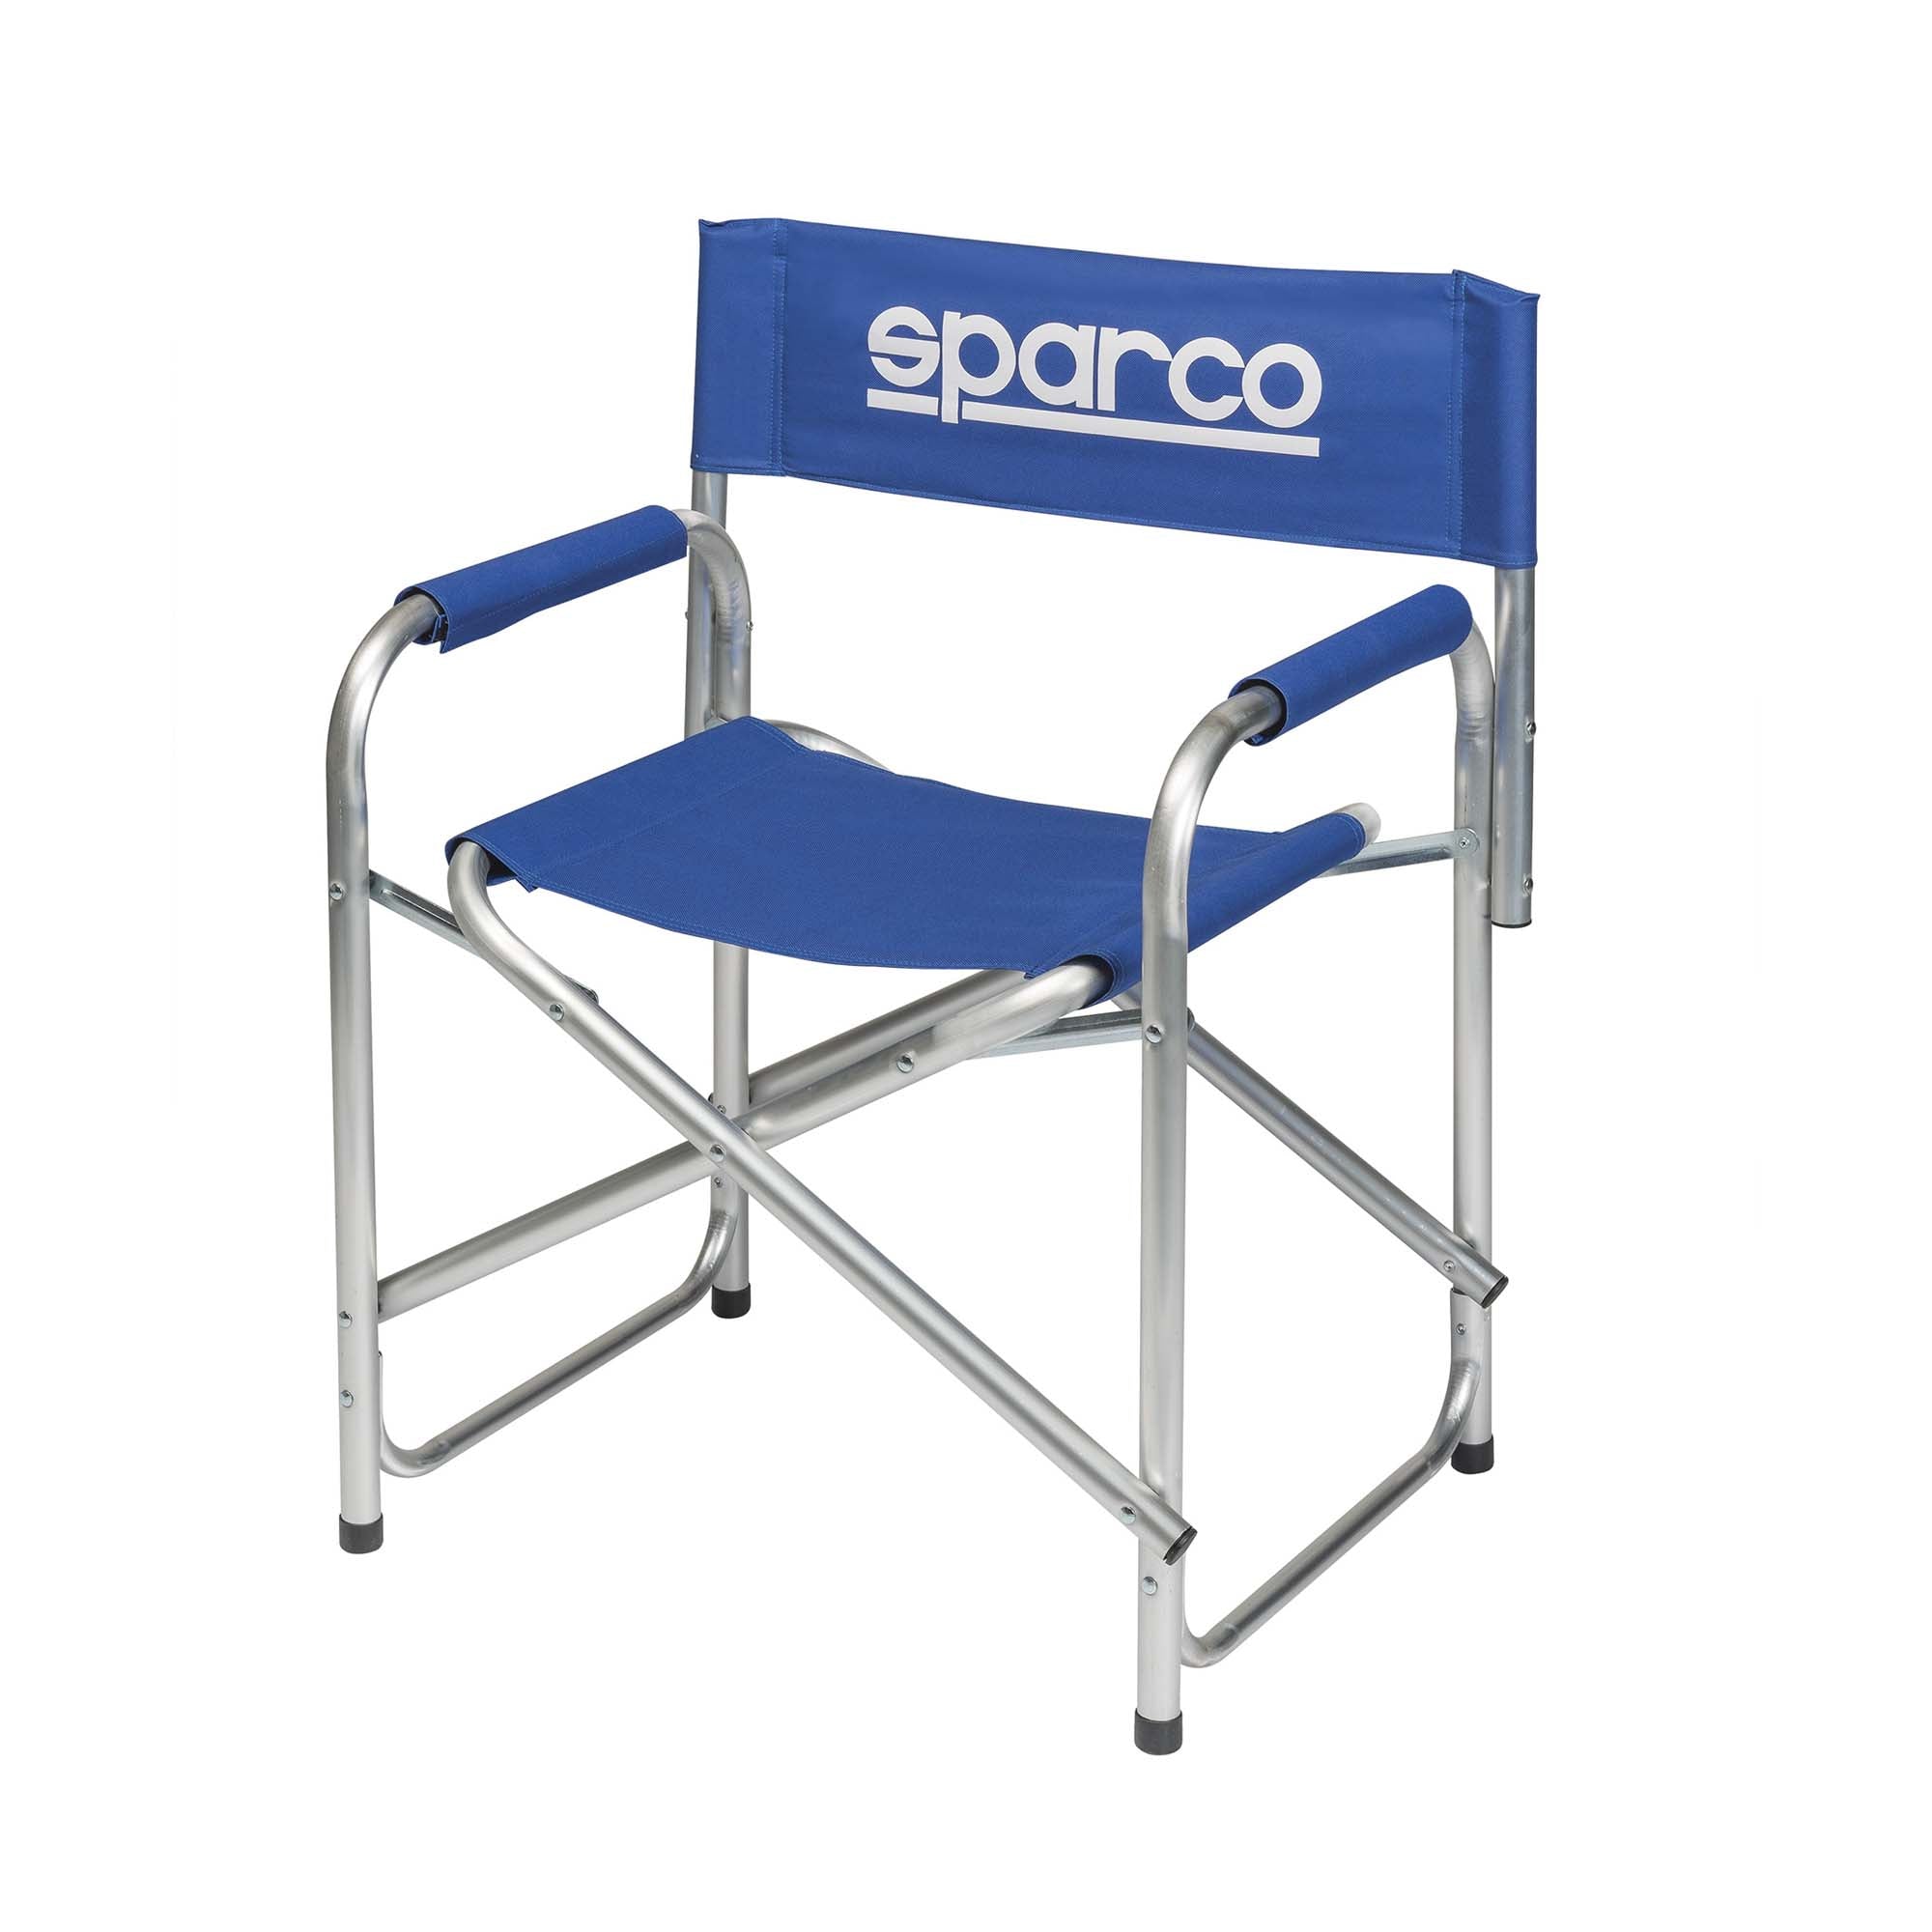 Sparco Directors Paddock Chair